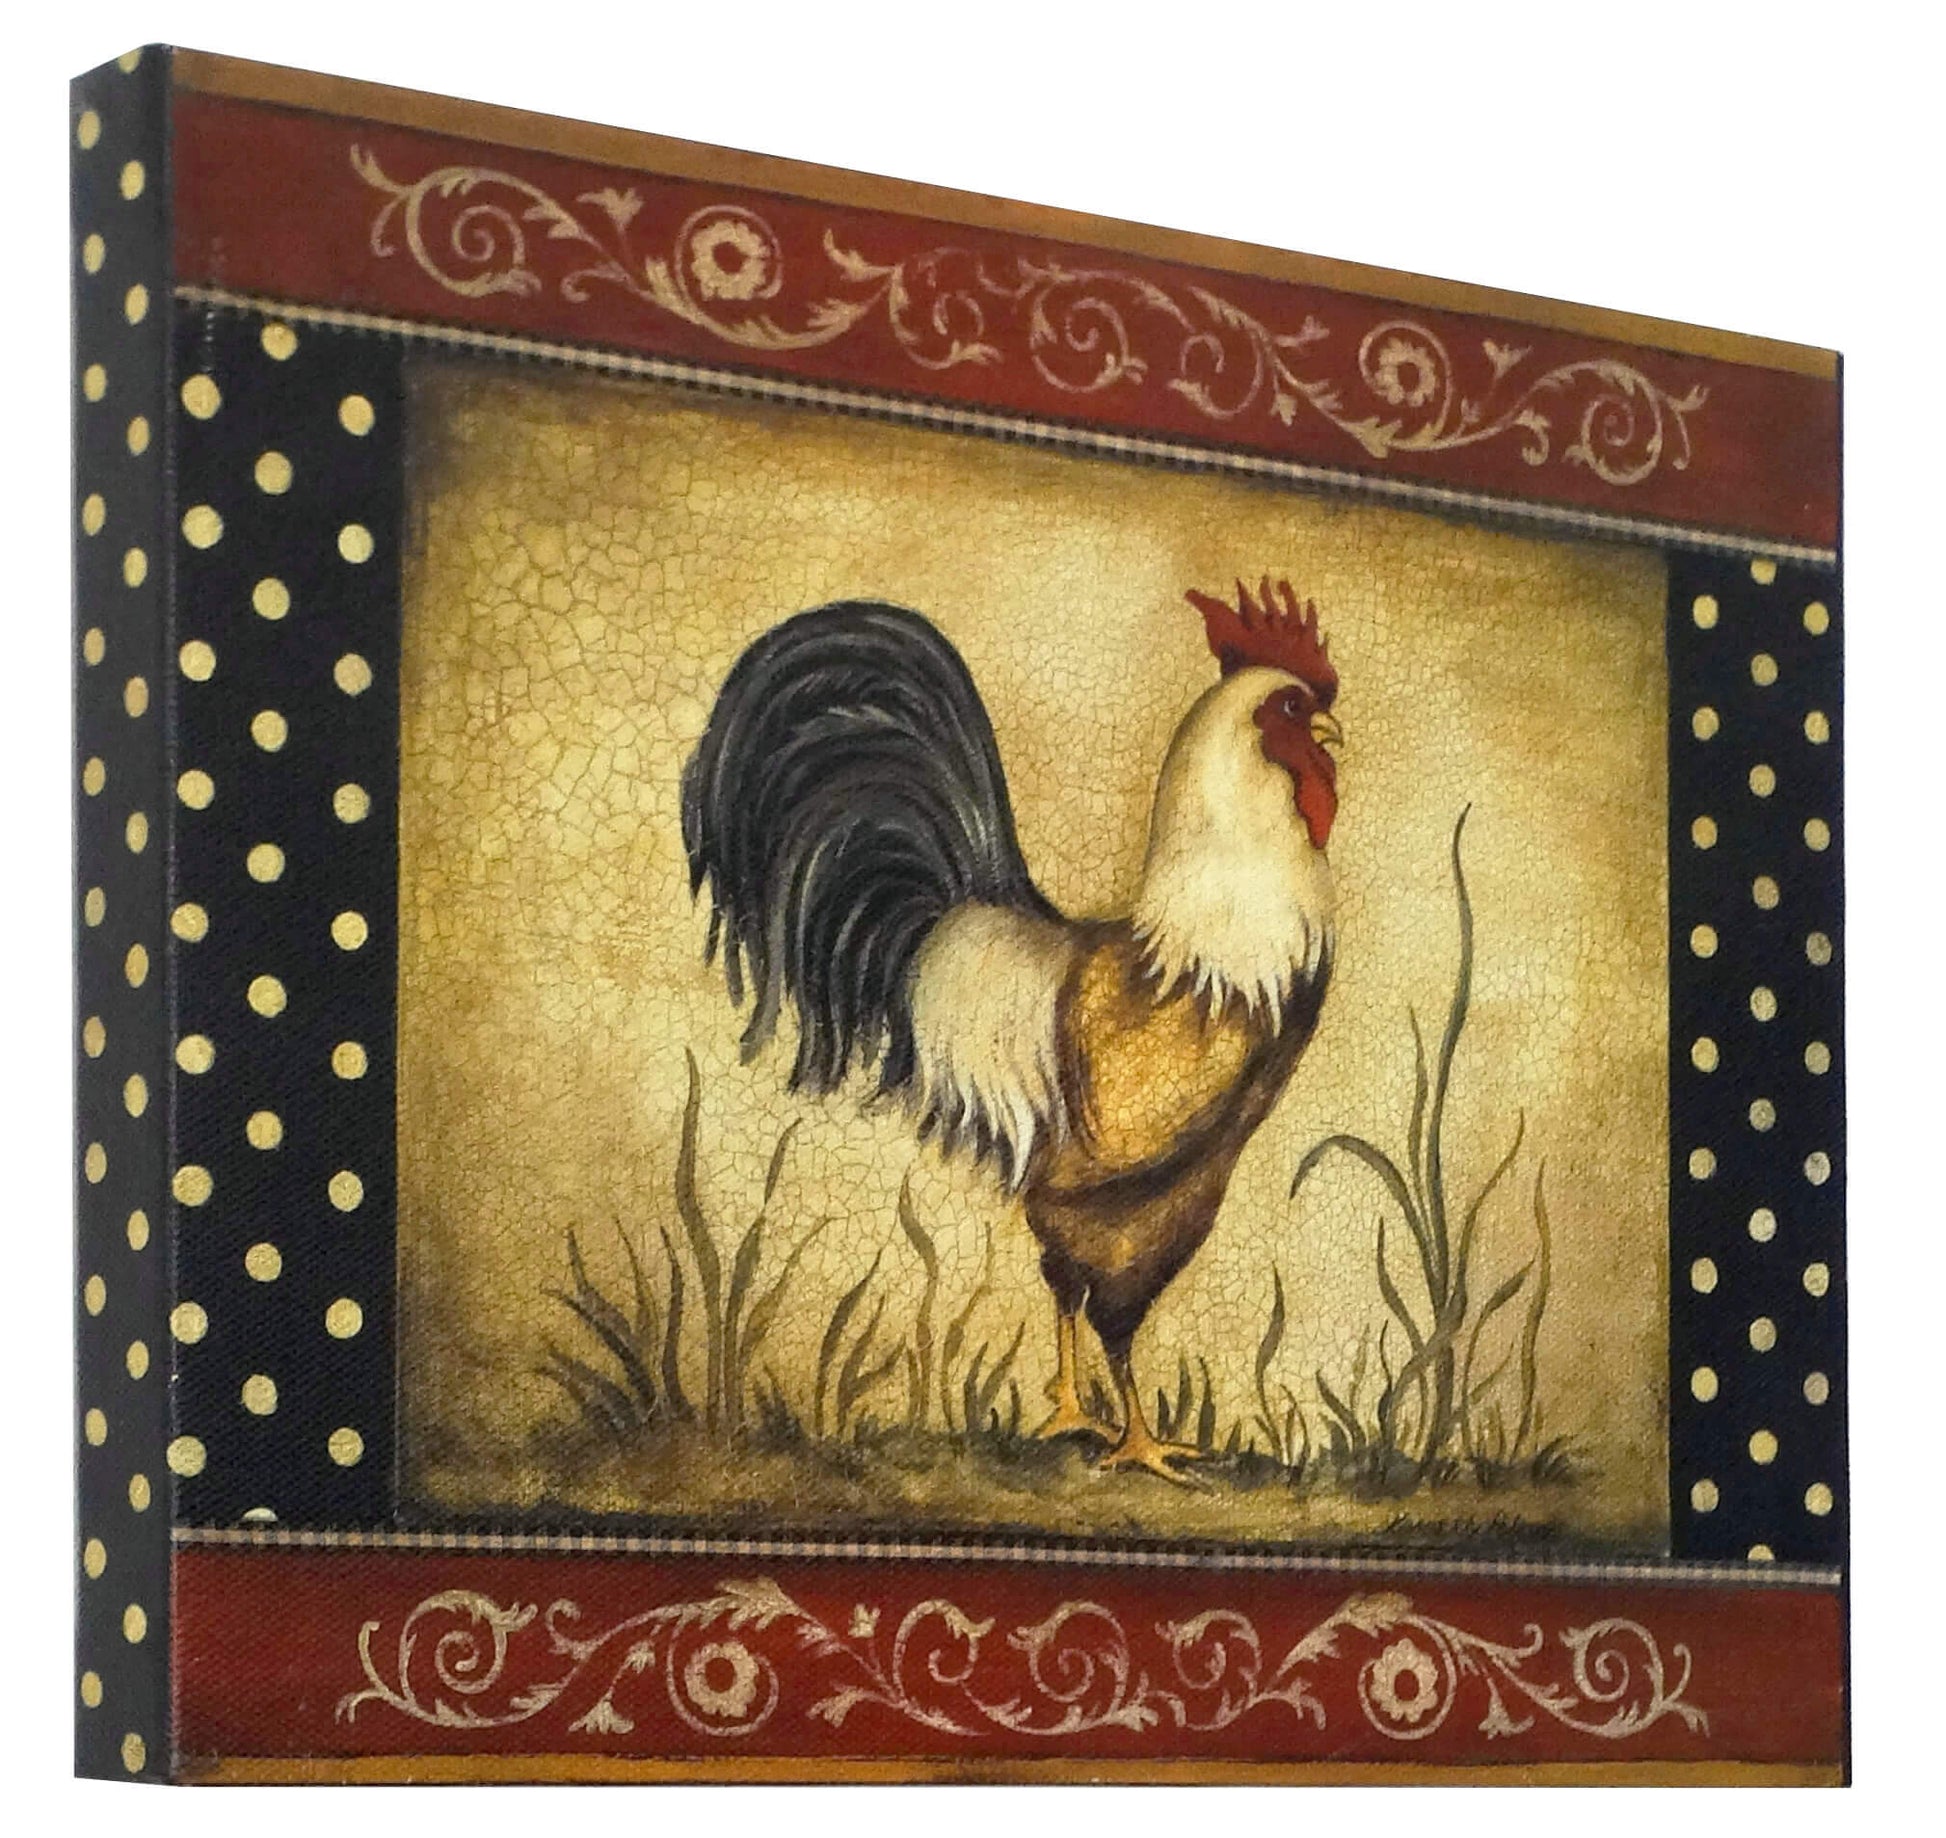 Kimberly-Poloson-Cock-A-Doodle-Doo-Rooster-Wall-Hanging-Art_-20x16_side-view,-shop-eBargainsAndDeals